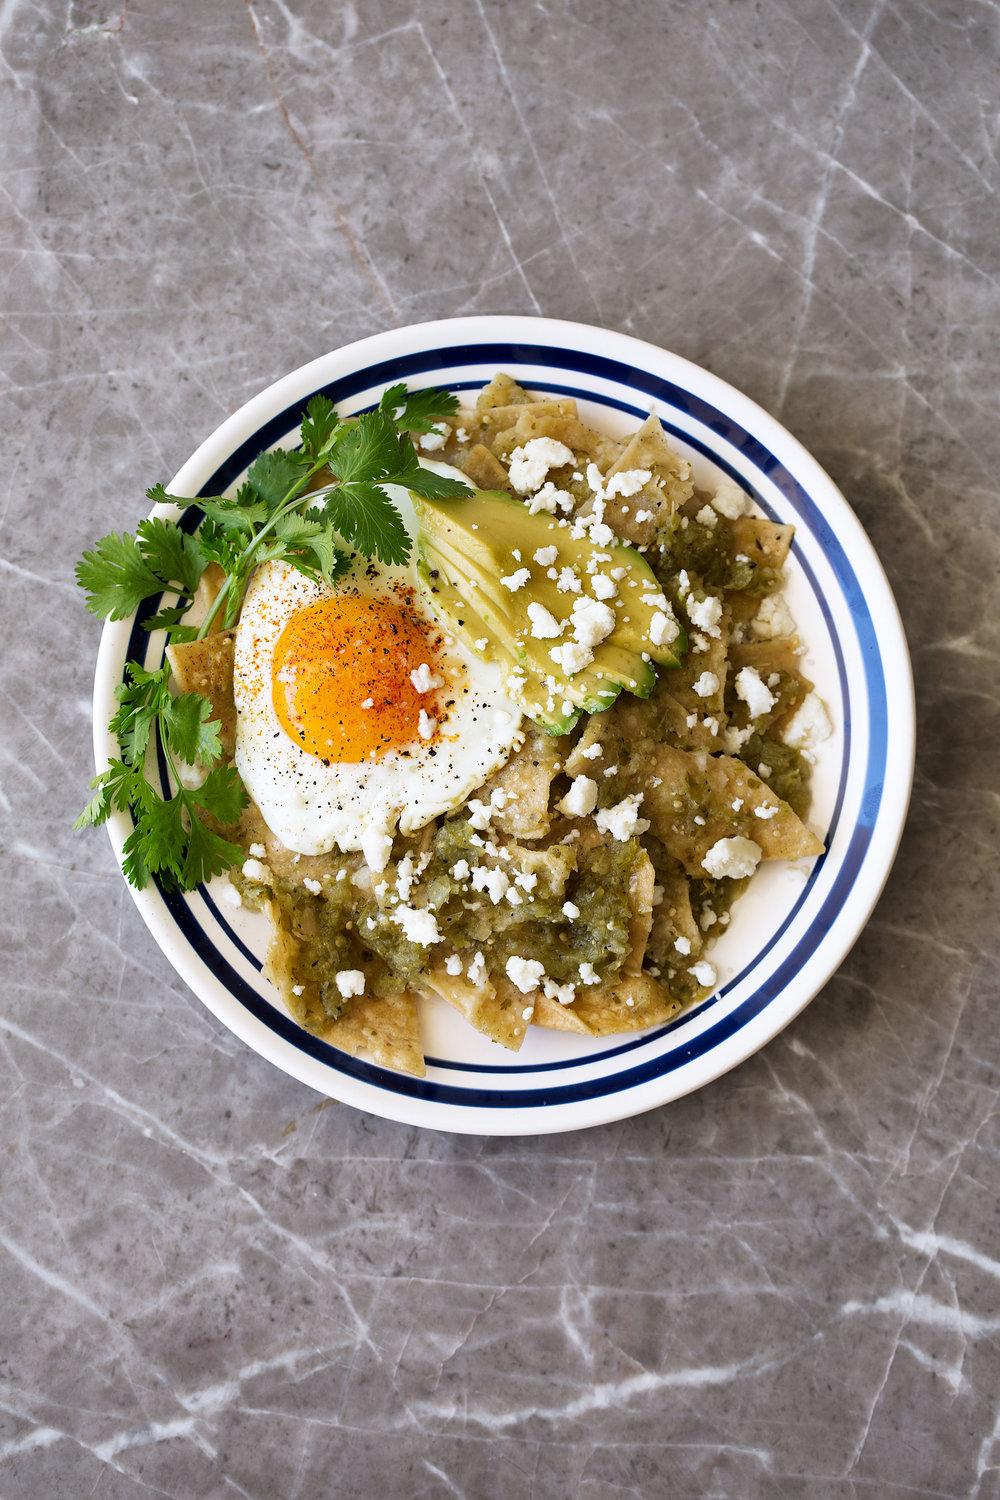 chilaquiles verdes with a fried egg recipe and avocado garnished with queso fresco